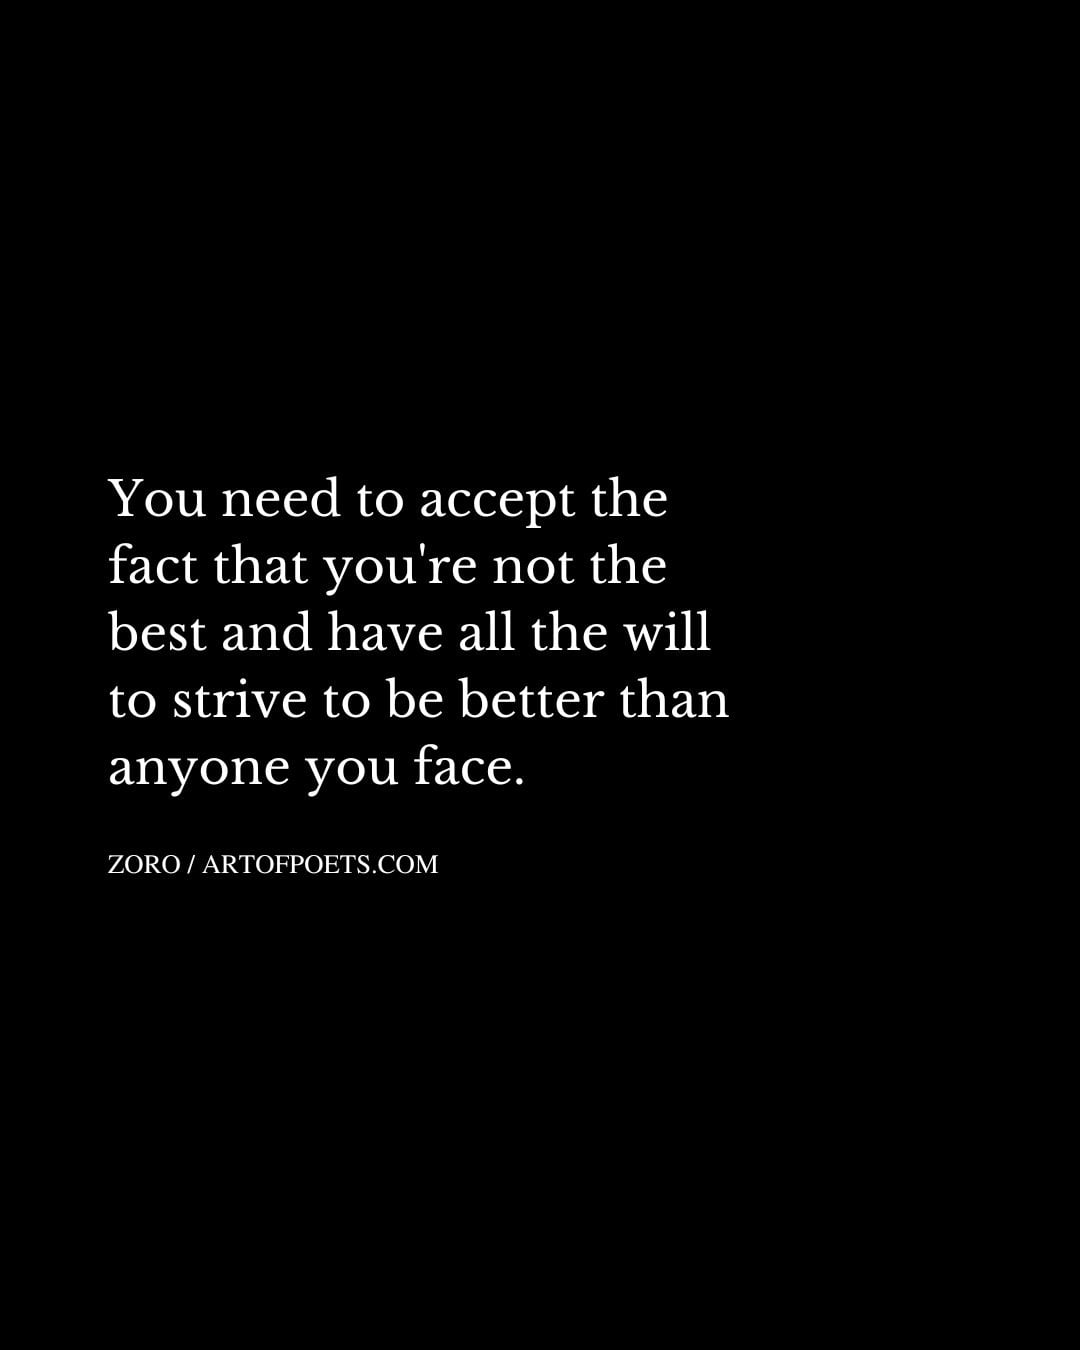 You need to accept the fact that youre not the best and have all the will to strive to be better than anyone you face